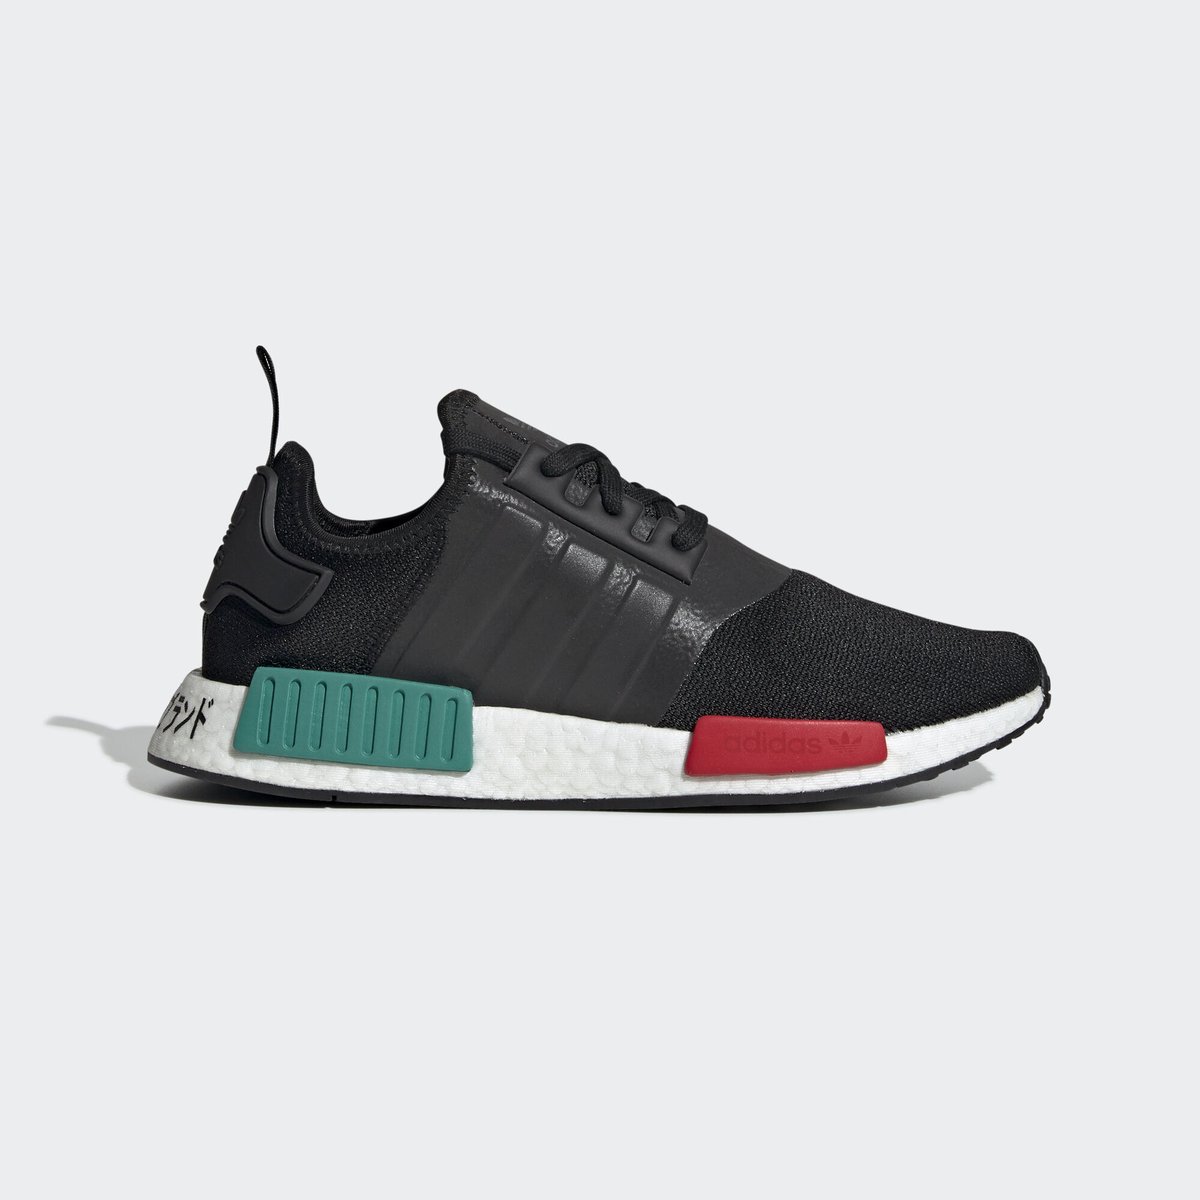 50% OFF on  #adidas US.adidas NMD_R1 Reflective.Retail $130. Now $65 shipped.—>  https://bit.ly/3bFAUzm   #ad